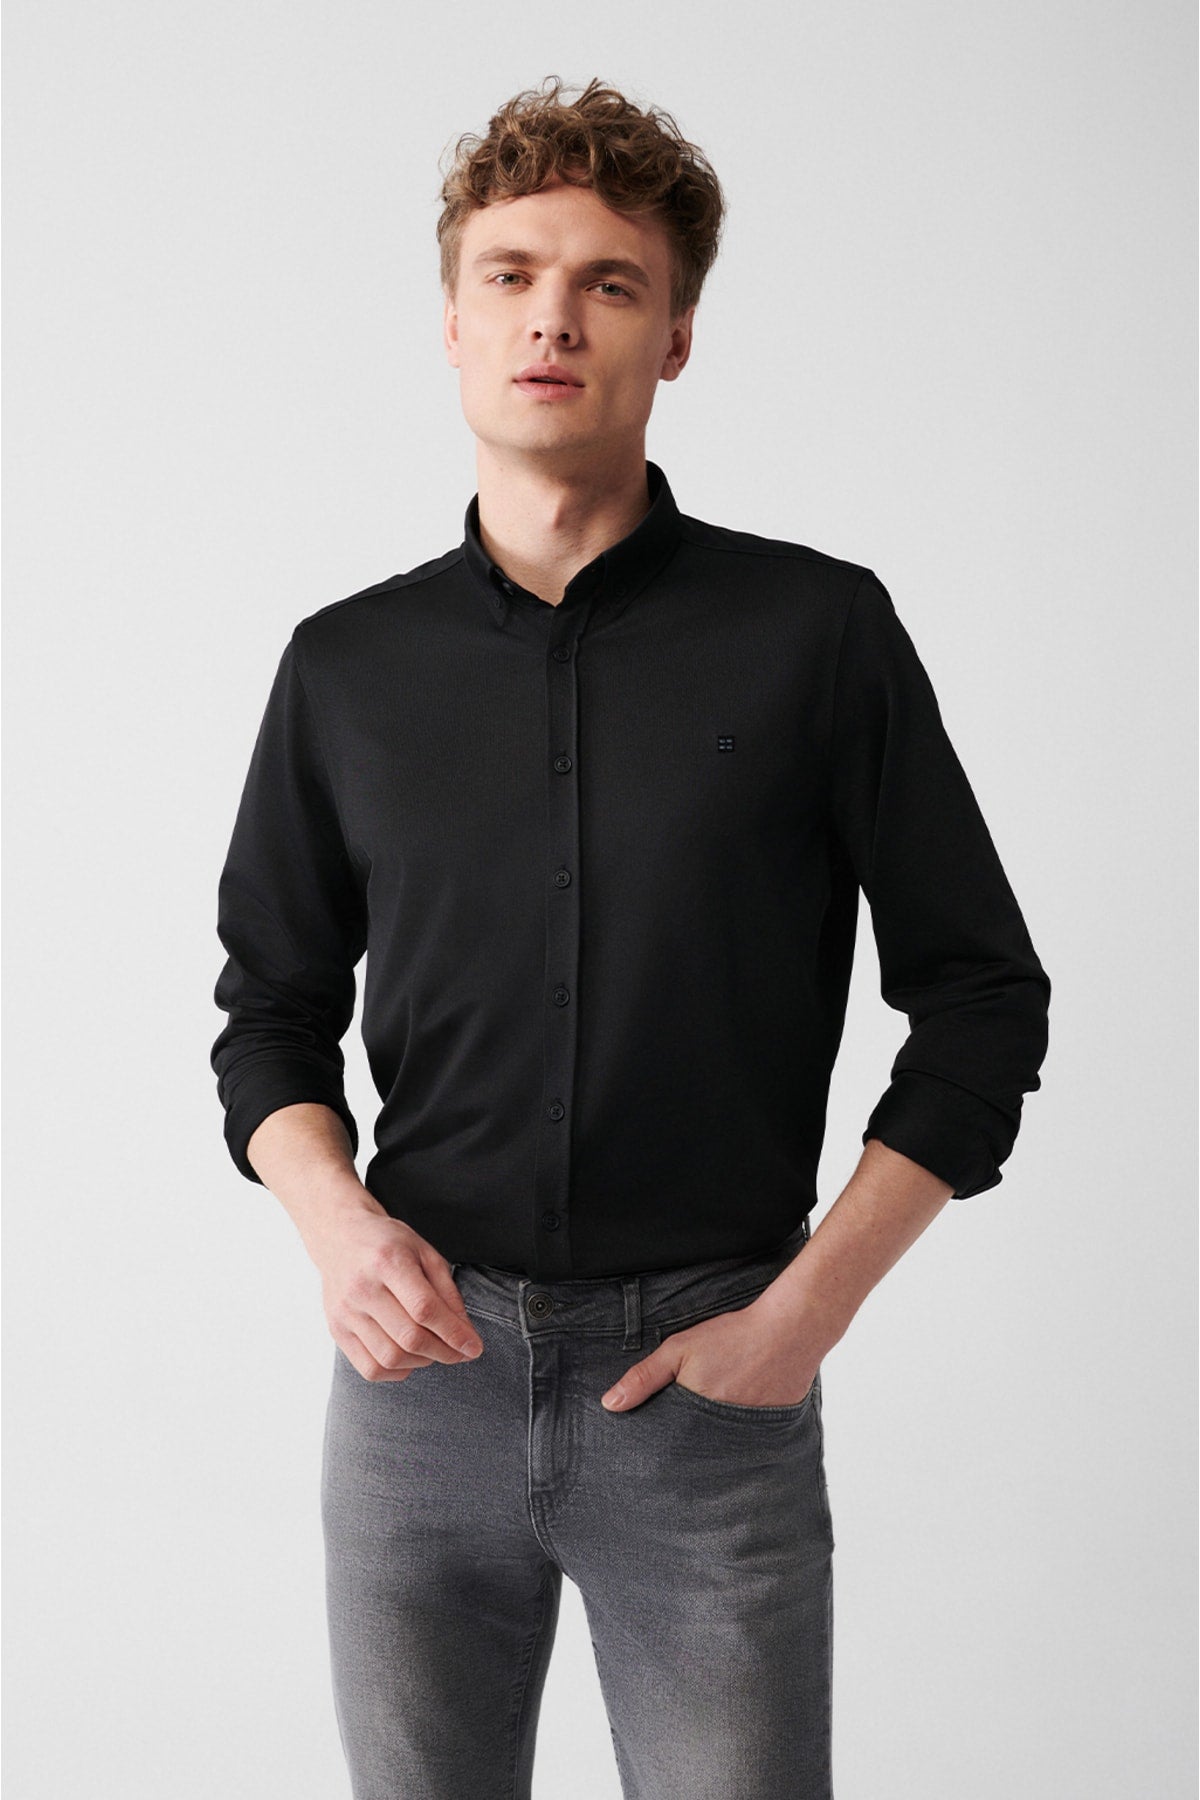 Men's Black Easy ironable textured knitting slim fit shirt A31y2067